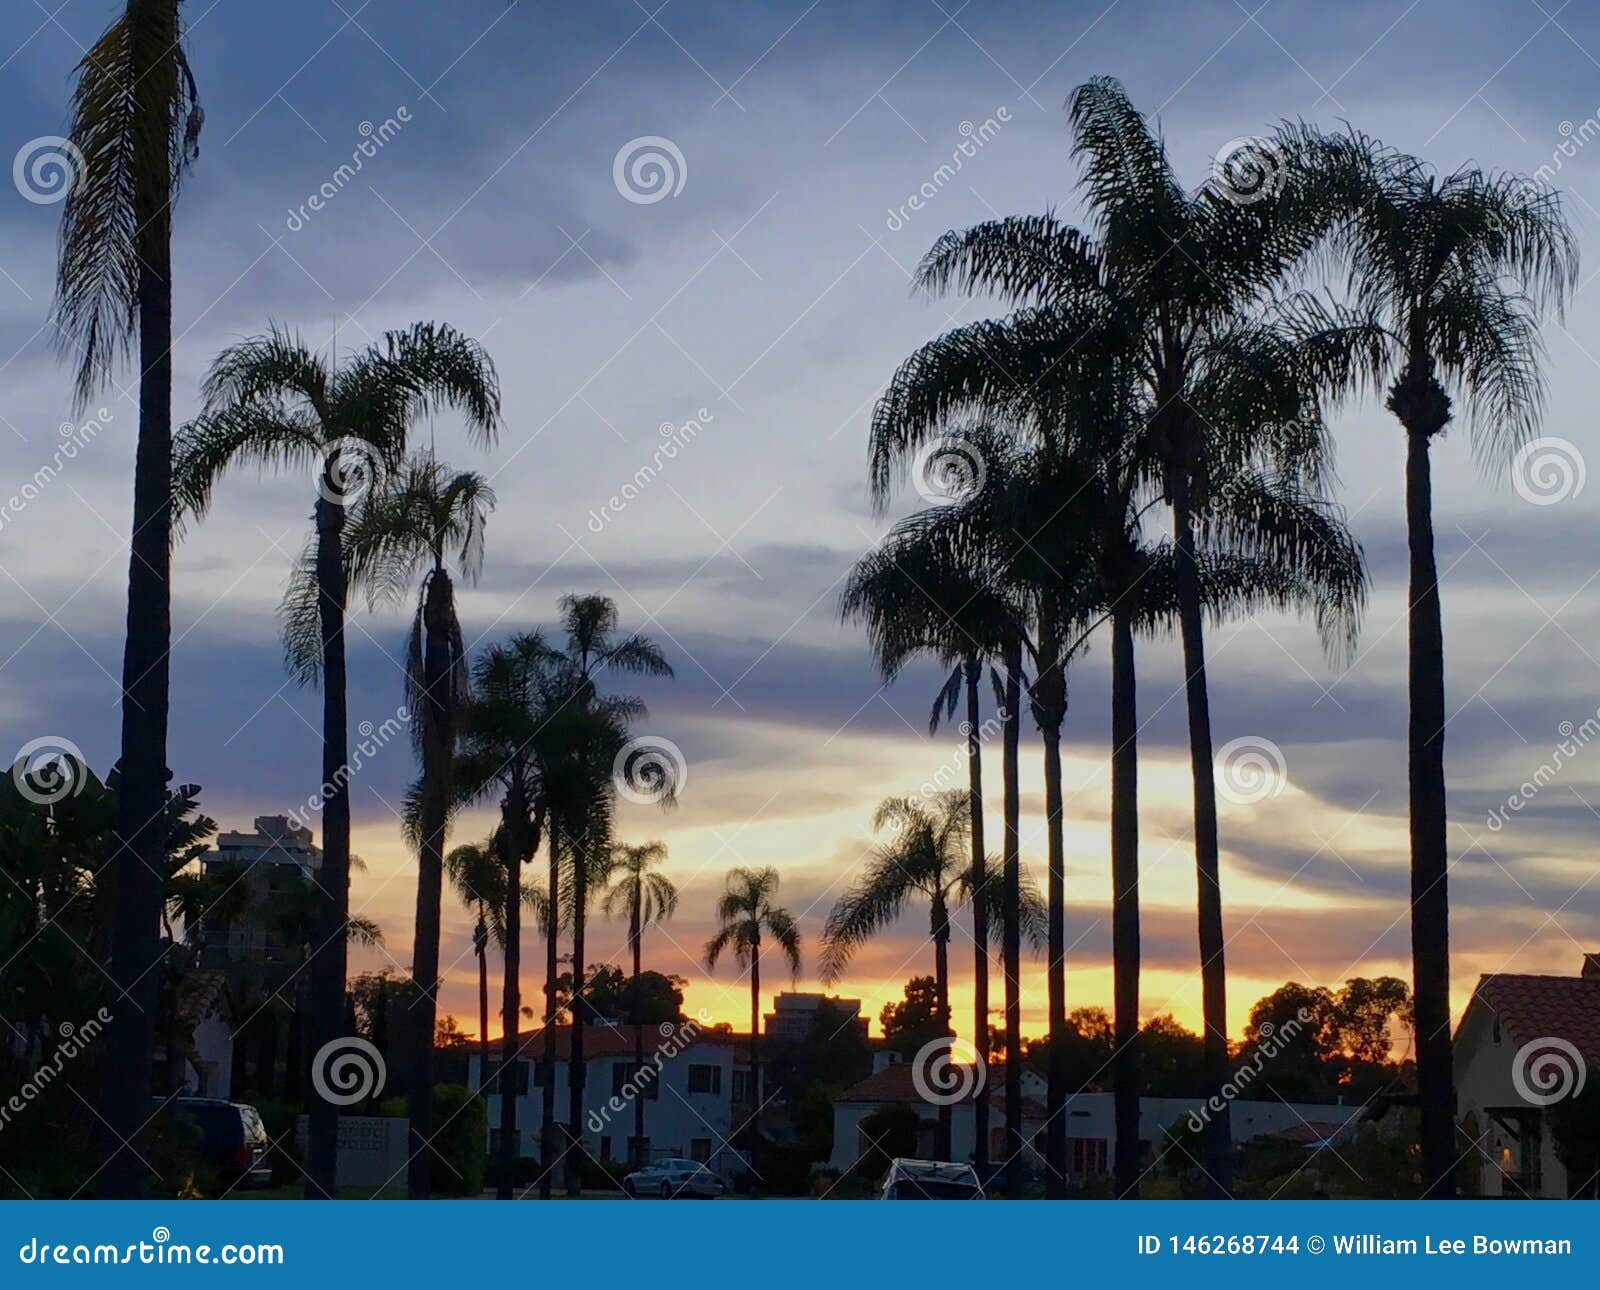 Sunset & Palms in San Diego Stock Photo - Image of dusk, palm: 146268744